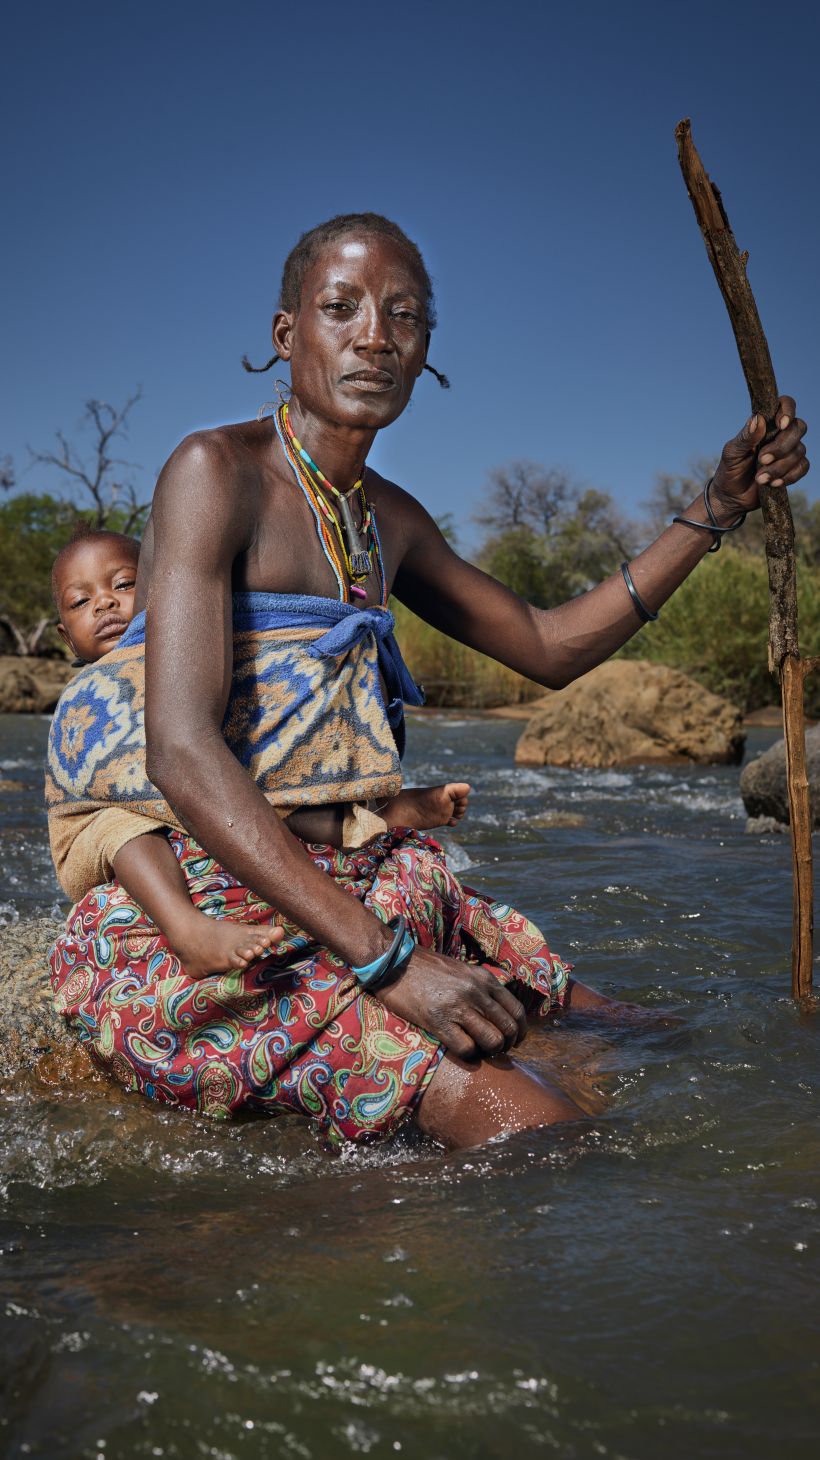 A photo of a woman with a child strapped to her back as they cross the river to get to Namibia from Angola.